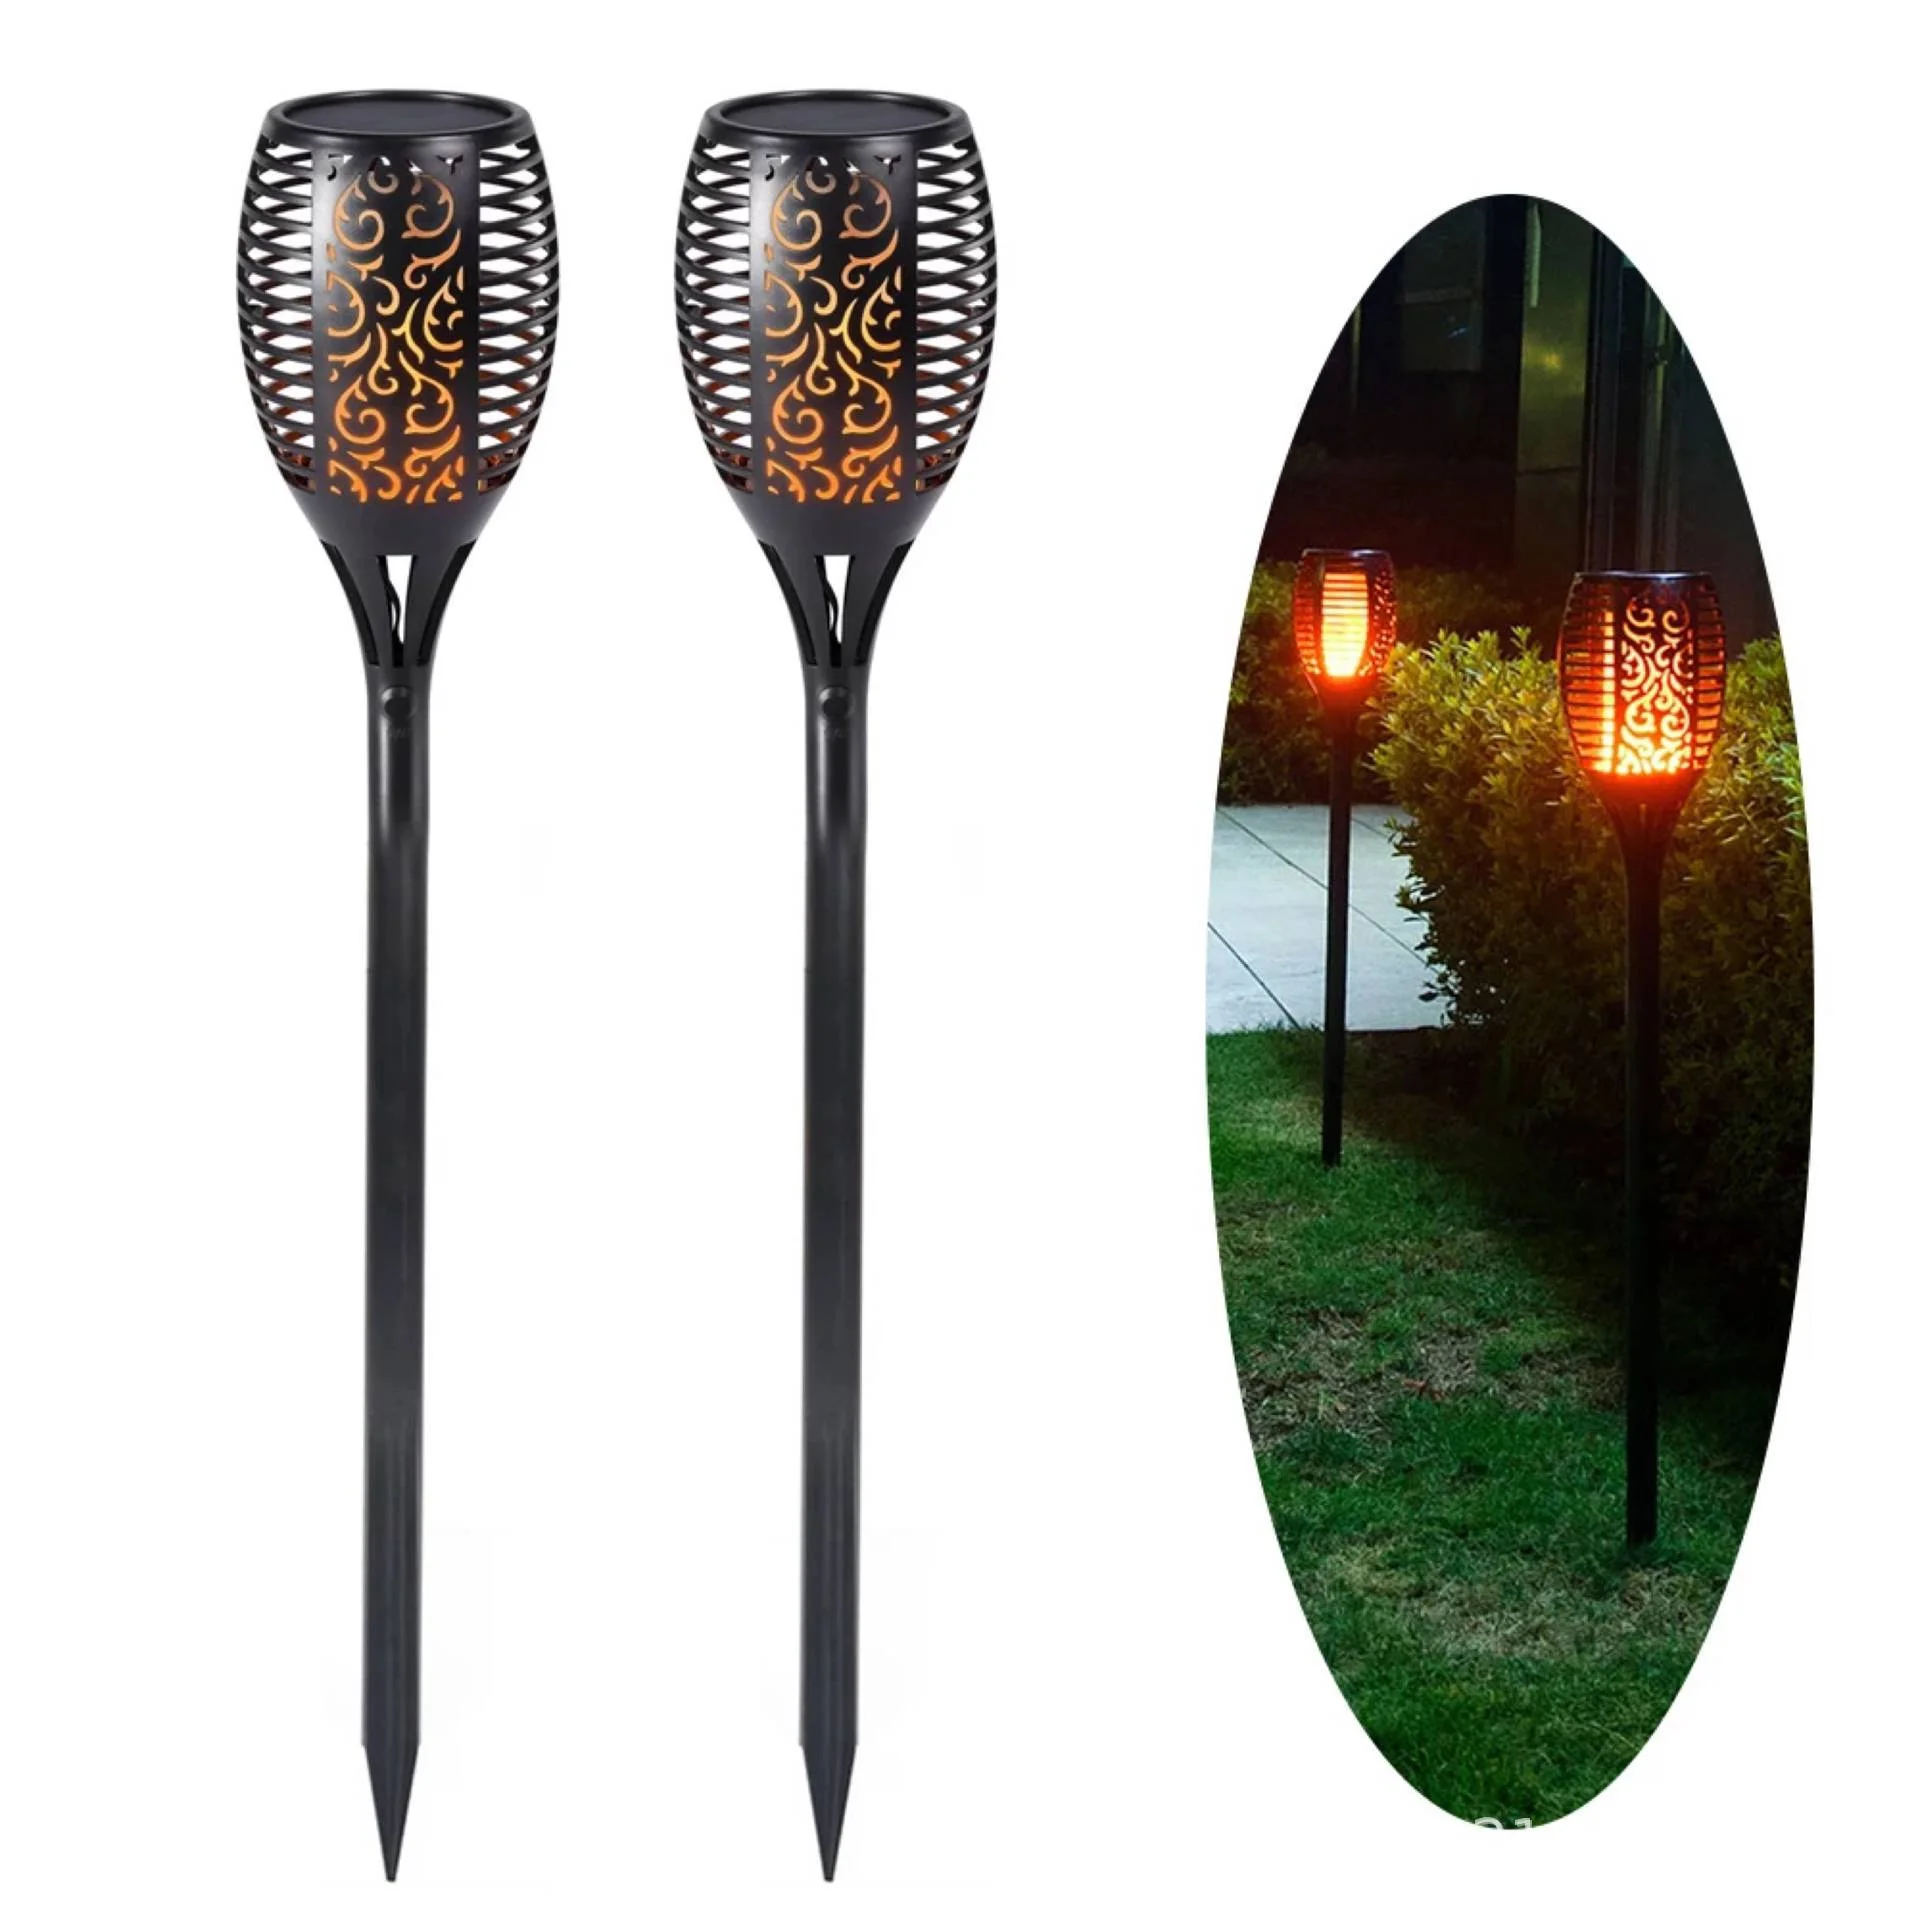 Latest beautiful and energy-saving looking solar flame lights